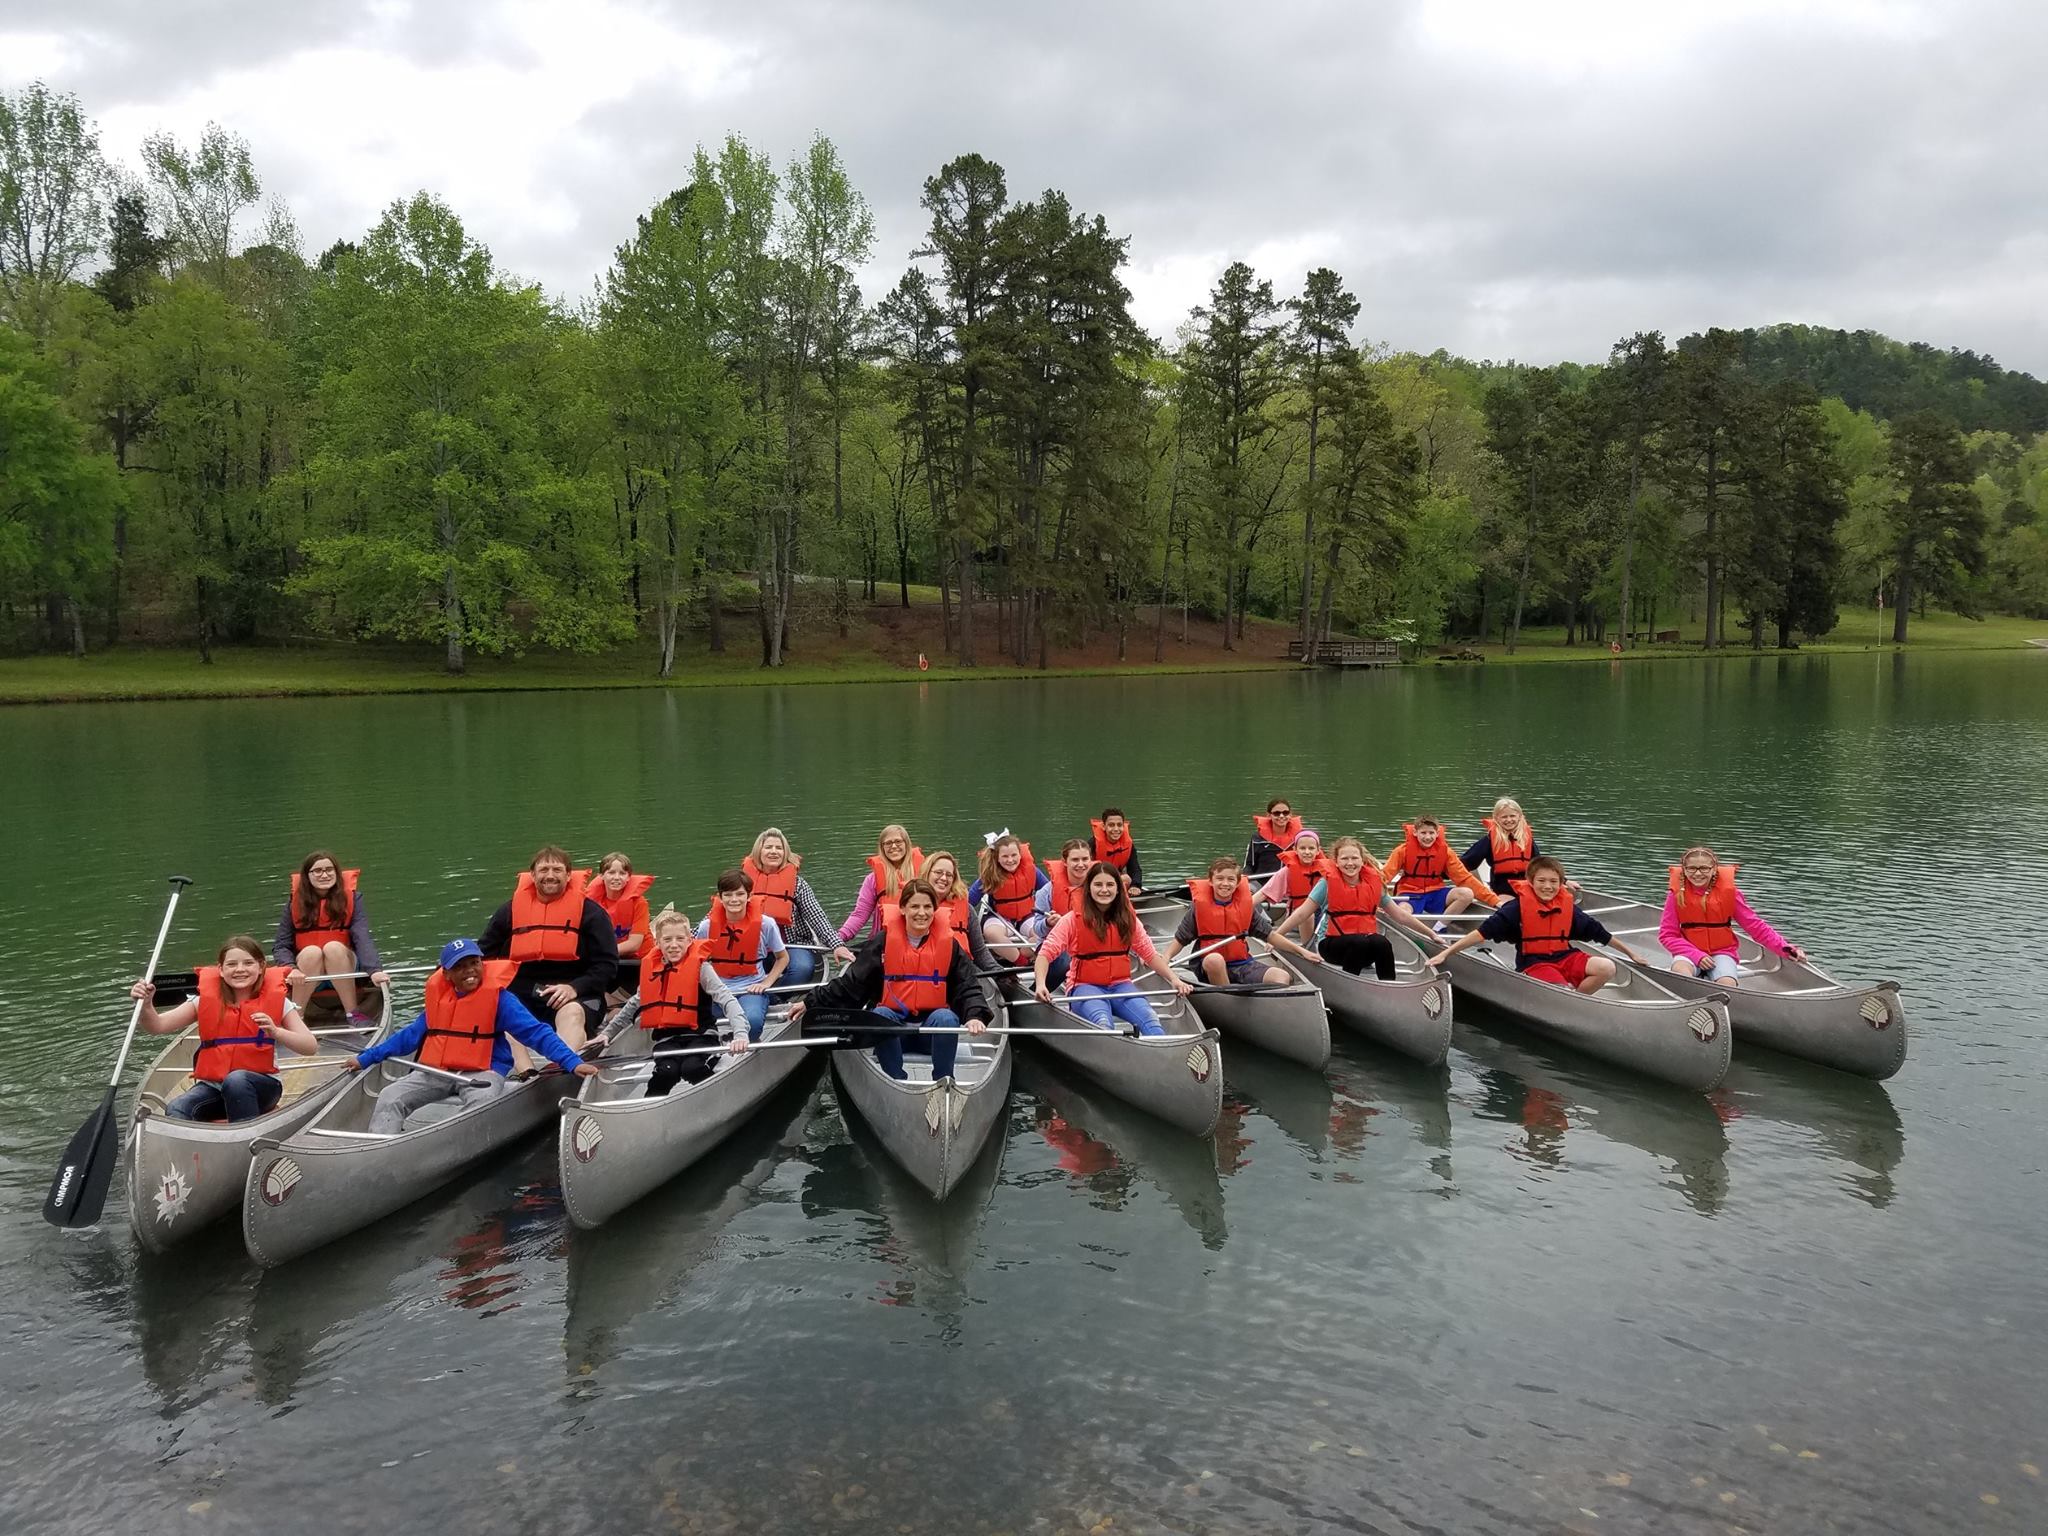 Large group of youth in multiple canoes, all wearing orange life vests, lake and trees in background